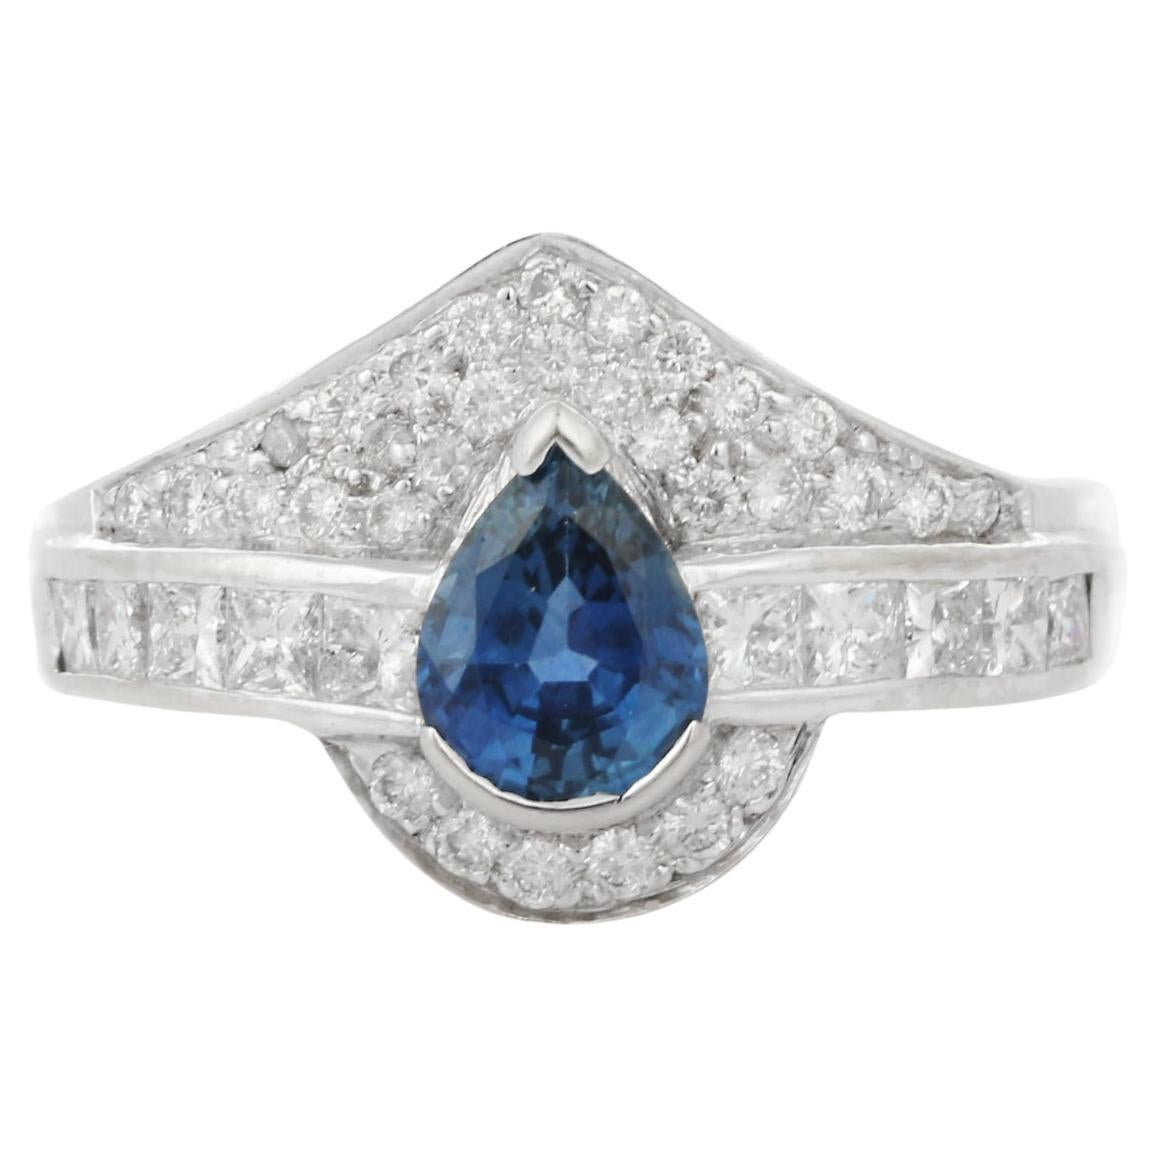 For Sale:  Regal Pear Cut Sapphire Diamond Wedding Ring in 18K White Gold